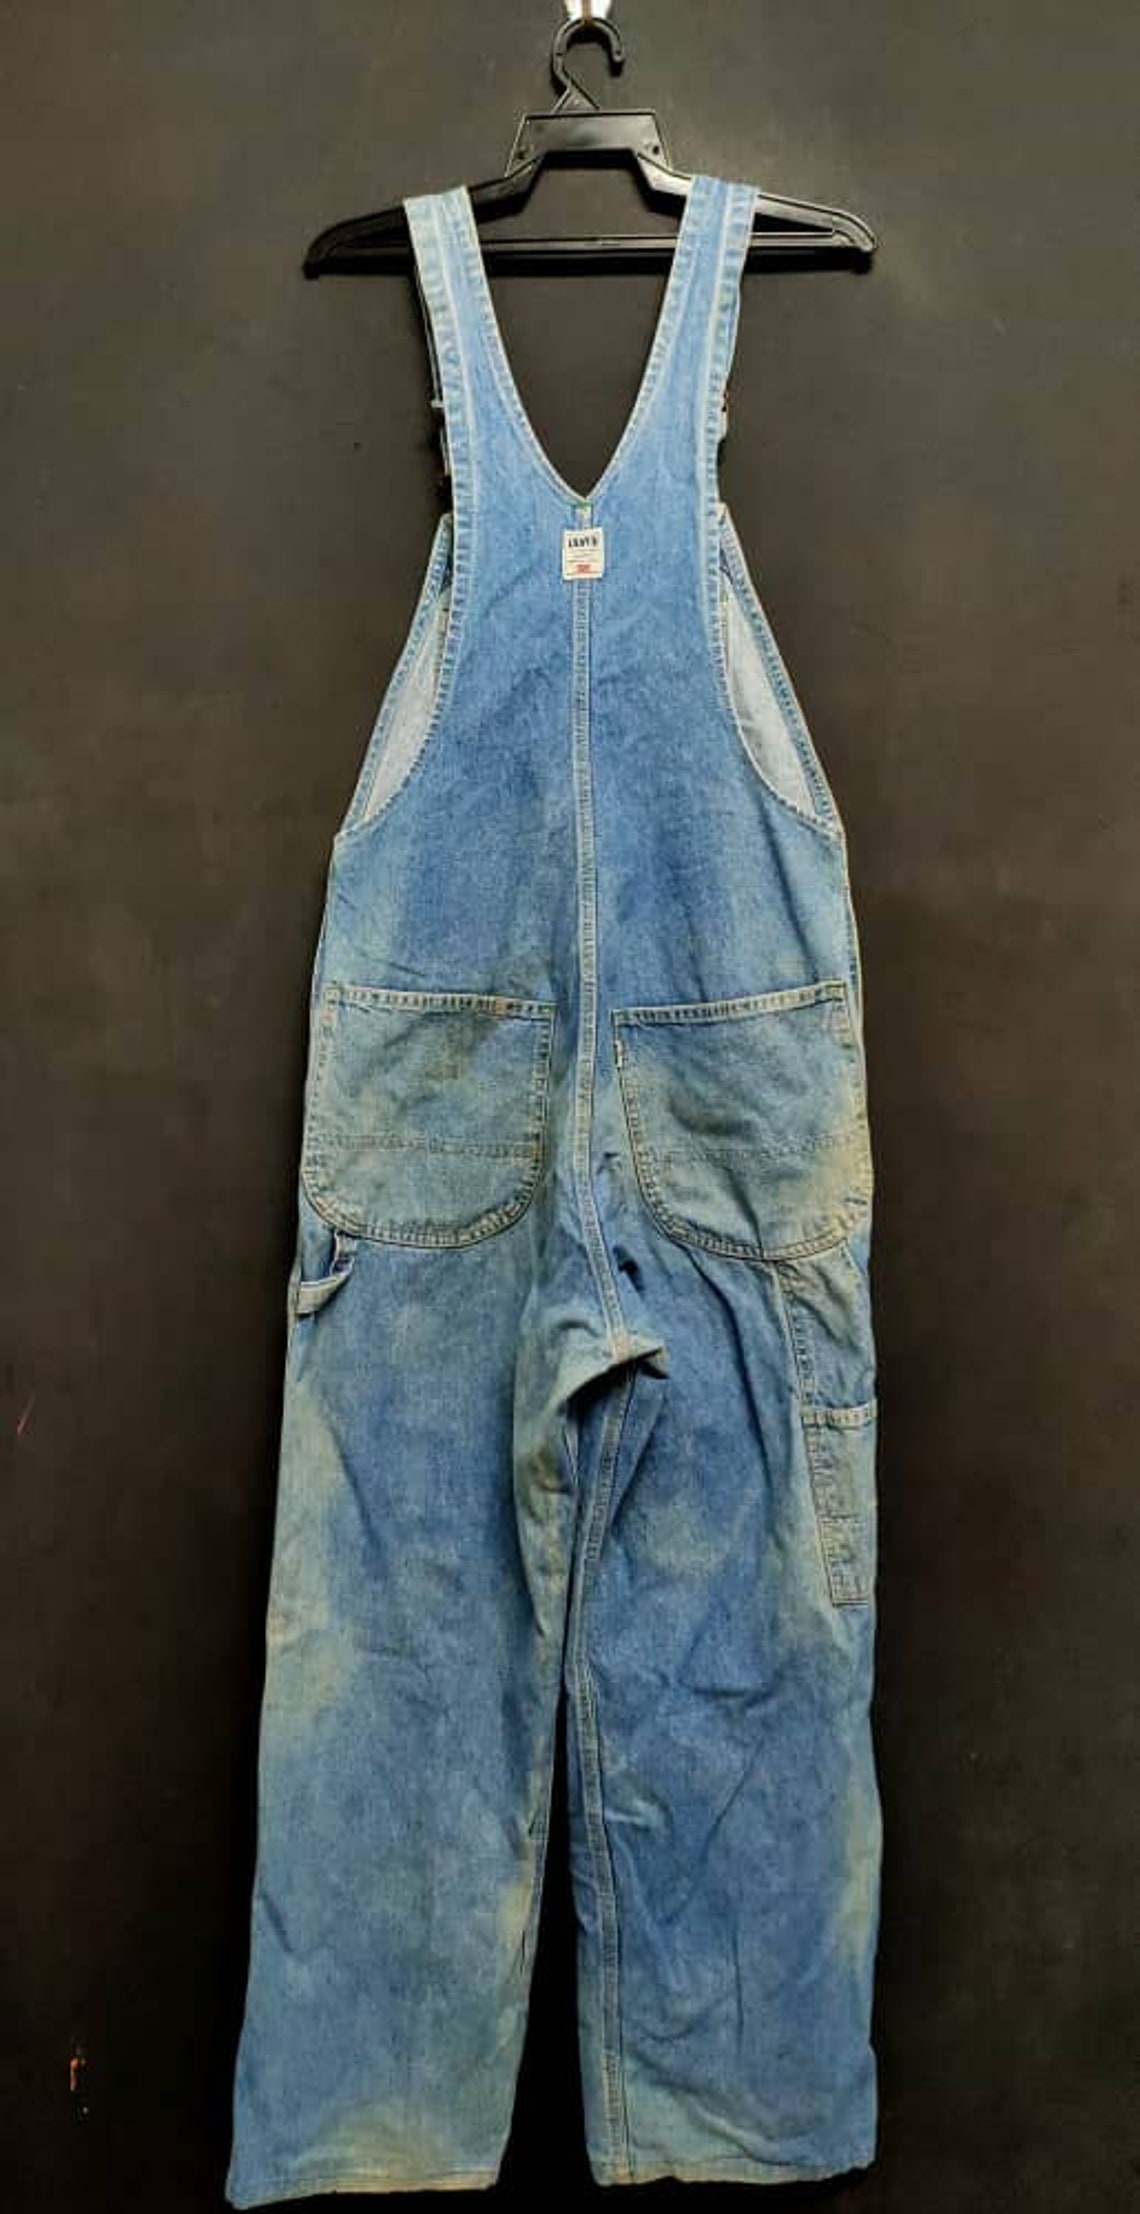 Vintage Levis Overall Size 34 | Etsy